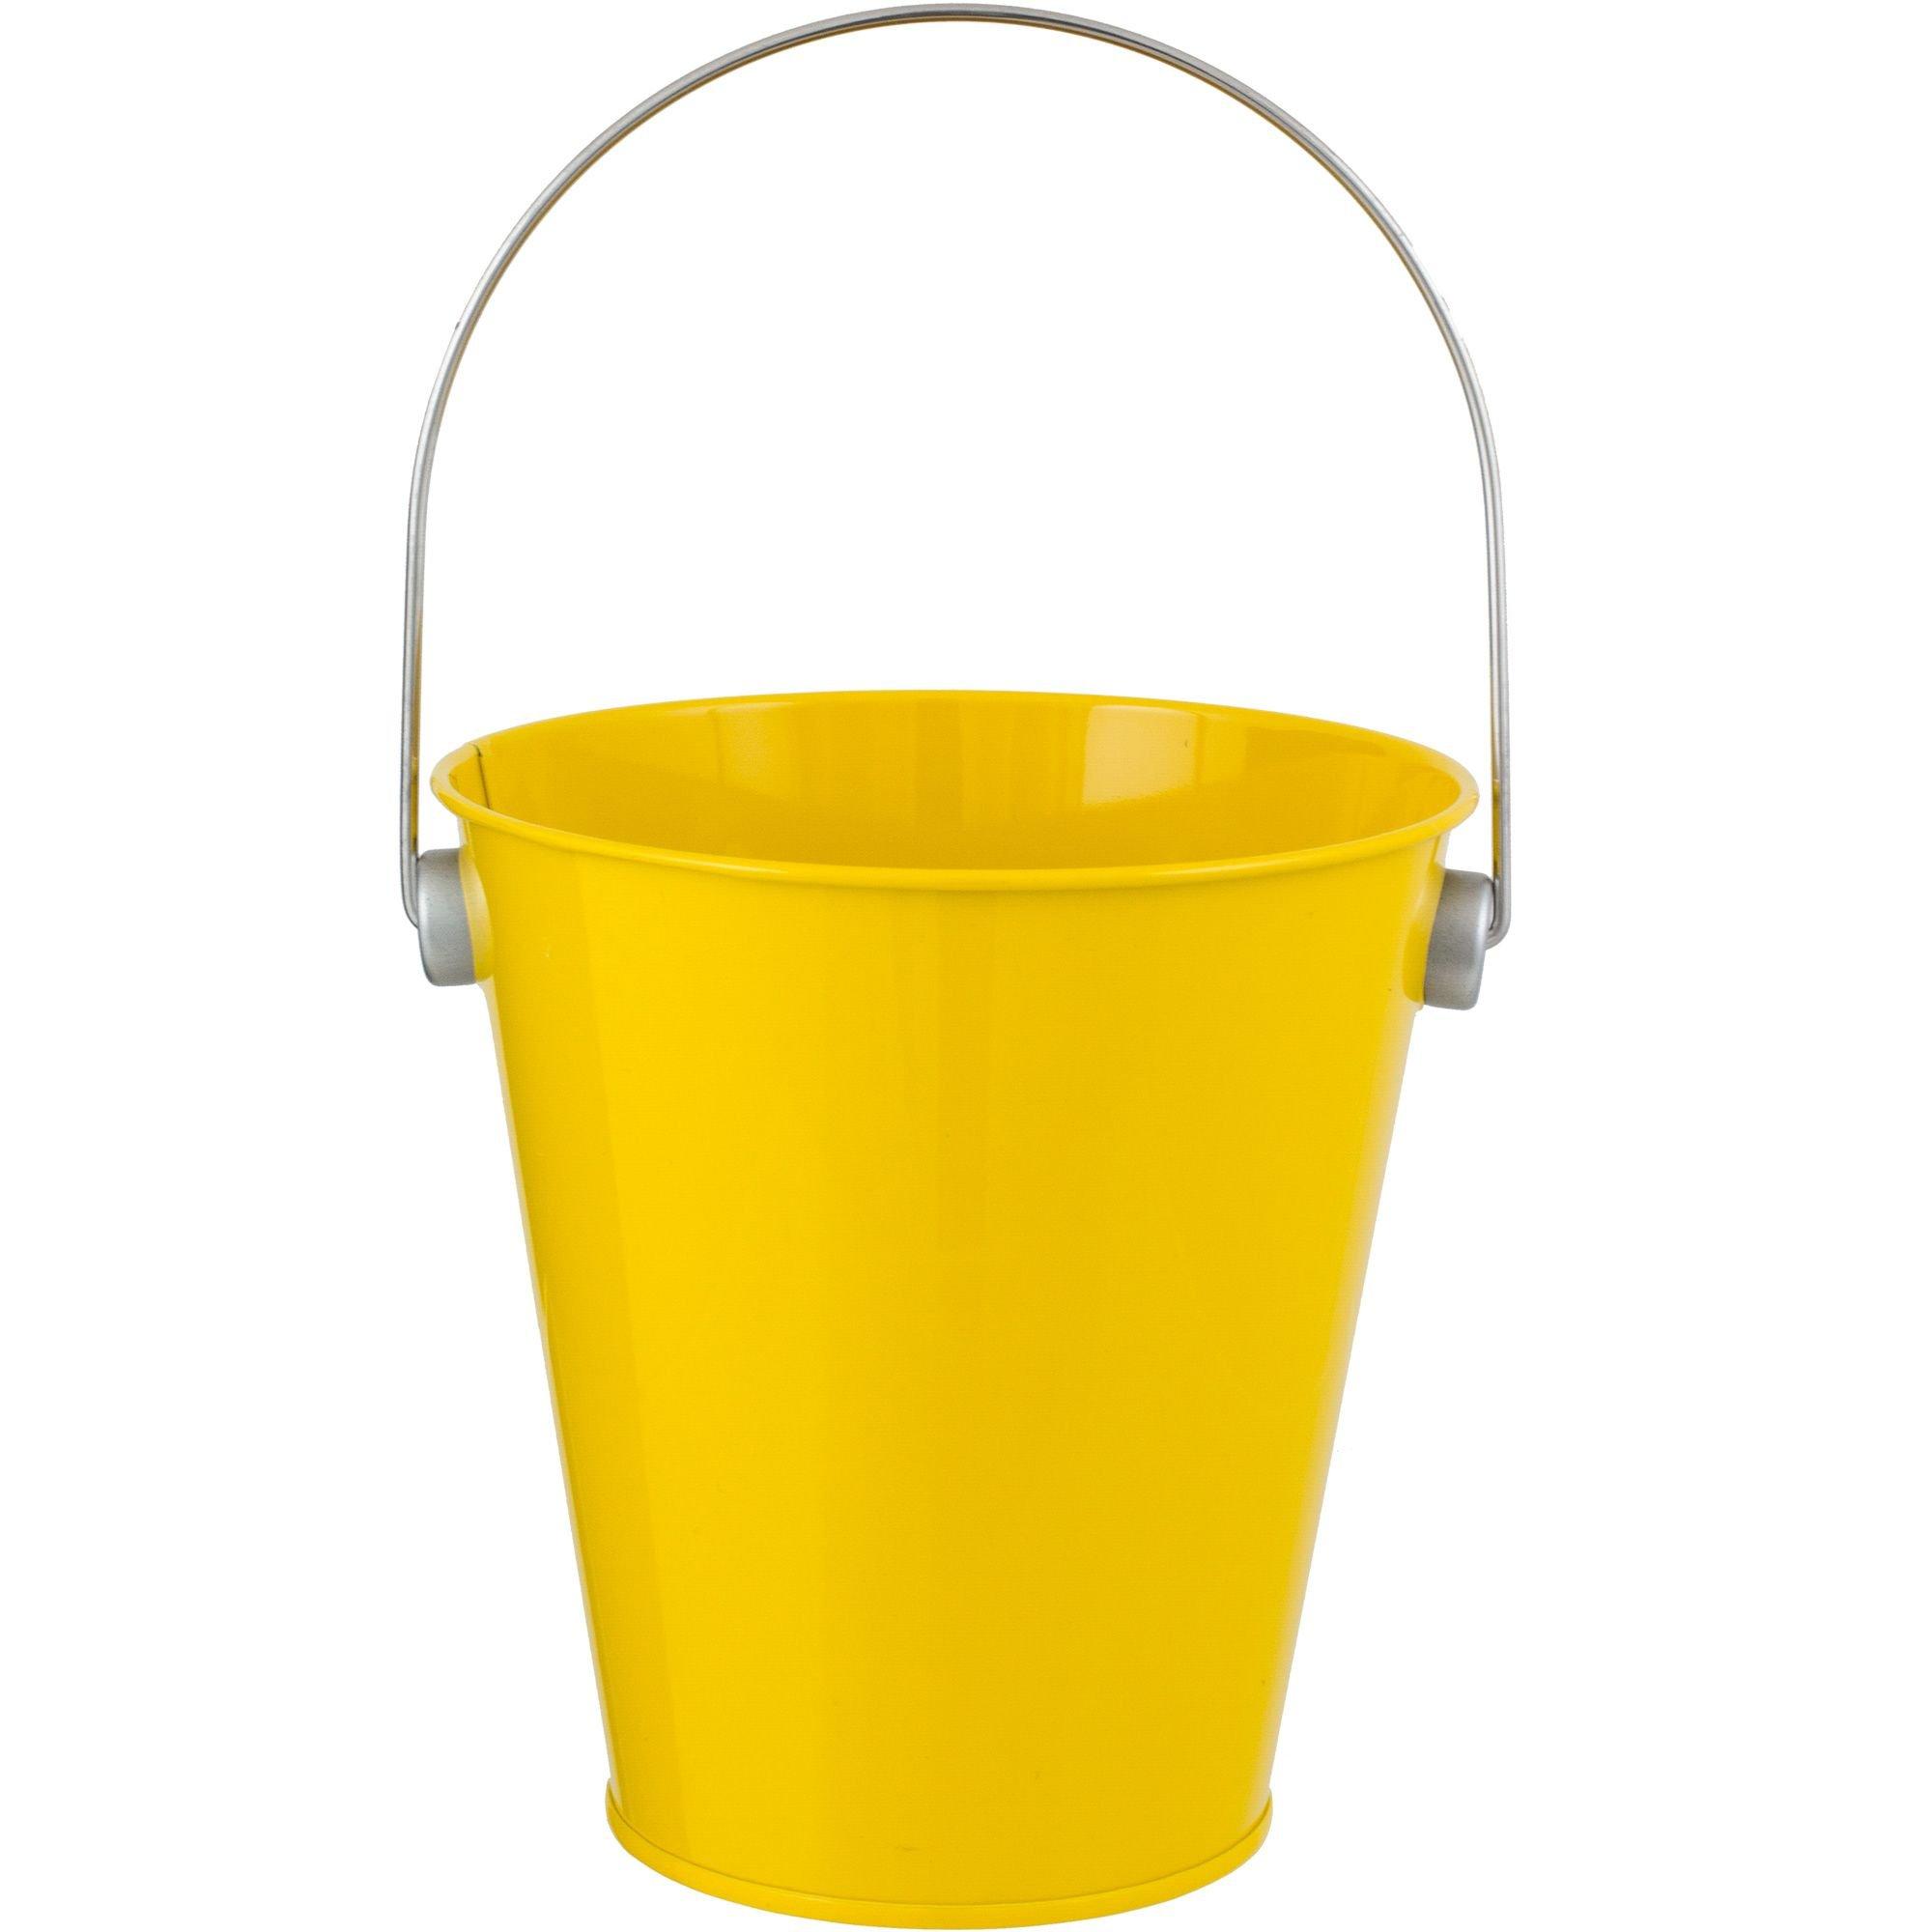 Metal Pail Buckets Candy Favor Boxes, 7-Inch